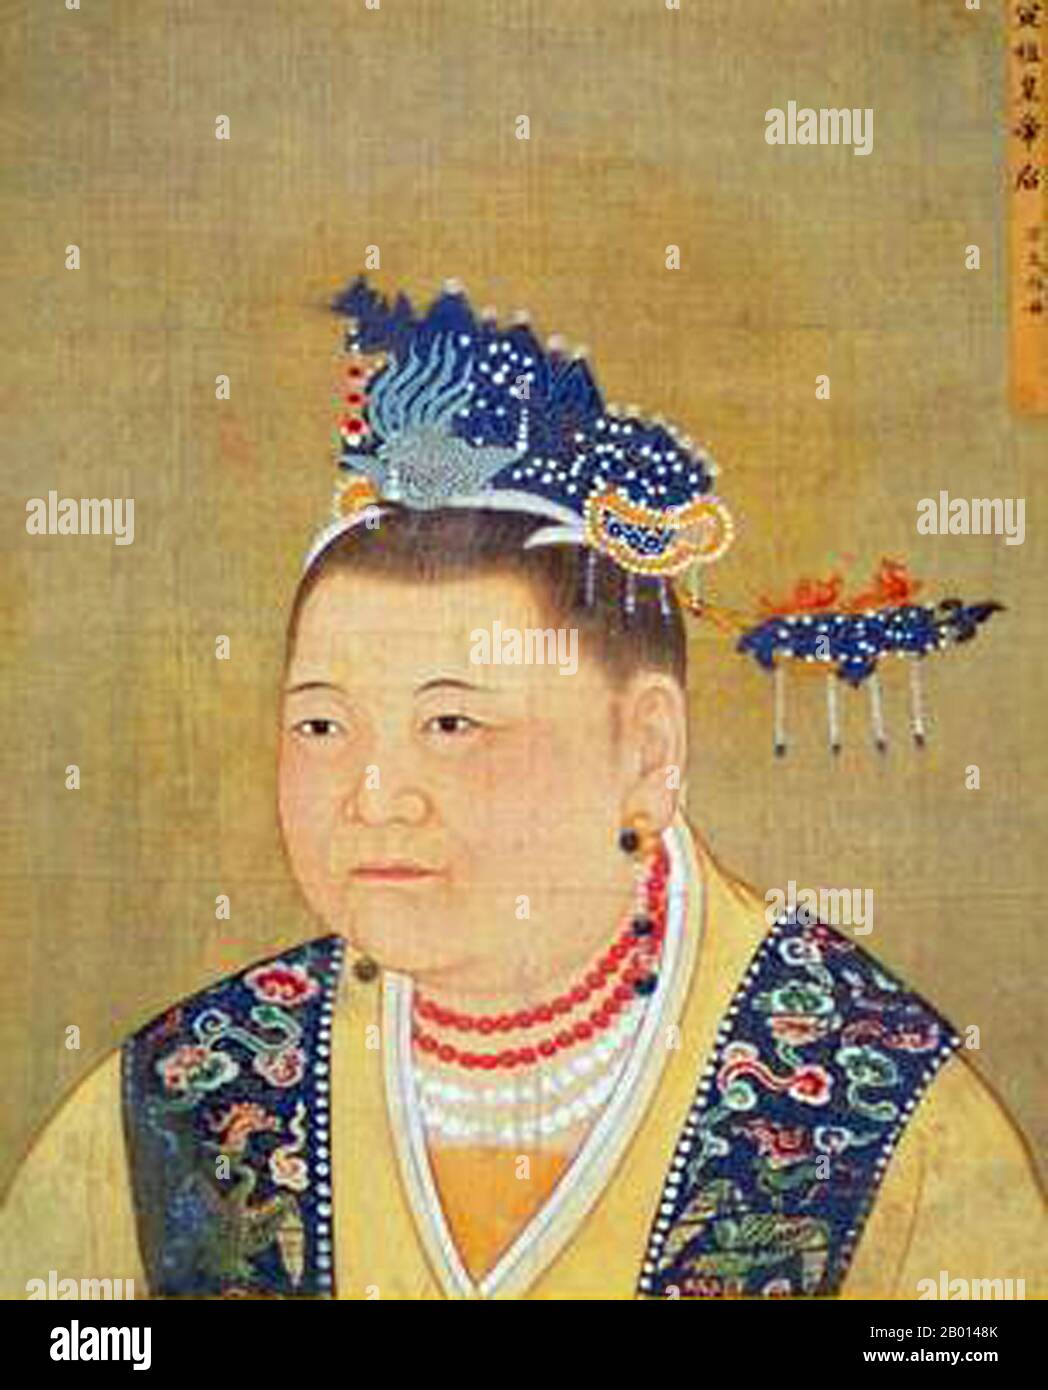 China: Empress Dowager Zhaoxian (902 - 17 July 961), mother of the first two Song emperors Taizu and Taizong. Hanging scroll painting, Song Dynasty (960-1279).  Lady Du, formally known as Zhaoxian, was an empress dowager of the Song Dynasty. She was the wife of general Zhao Hongyin and mother of the first two Song emperors Taizu and Taizong. Emperor Taizong claimed legitimacy to the throne through her apparent will, allegedly sealed in a golden shelf at her death, though many historians believe he fabricated this. Stock Photo